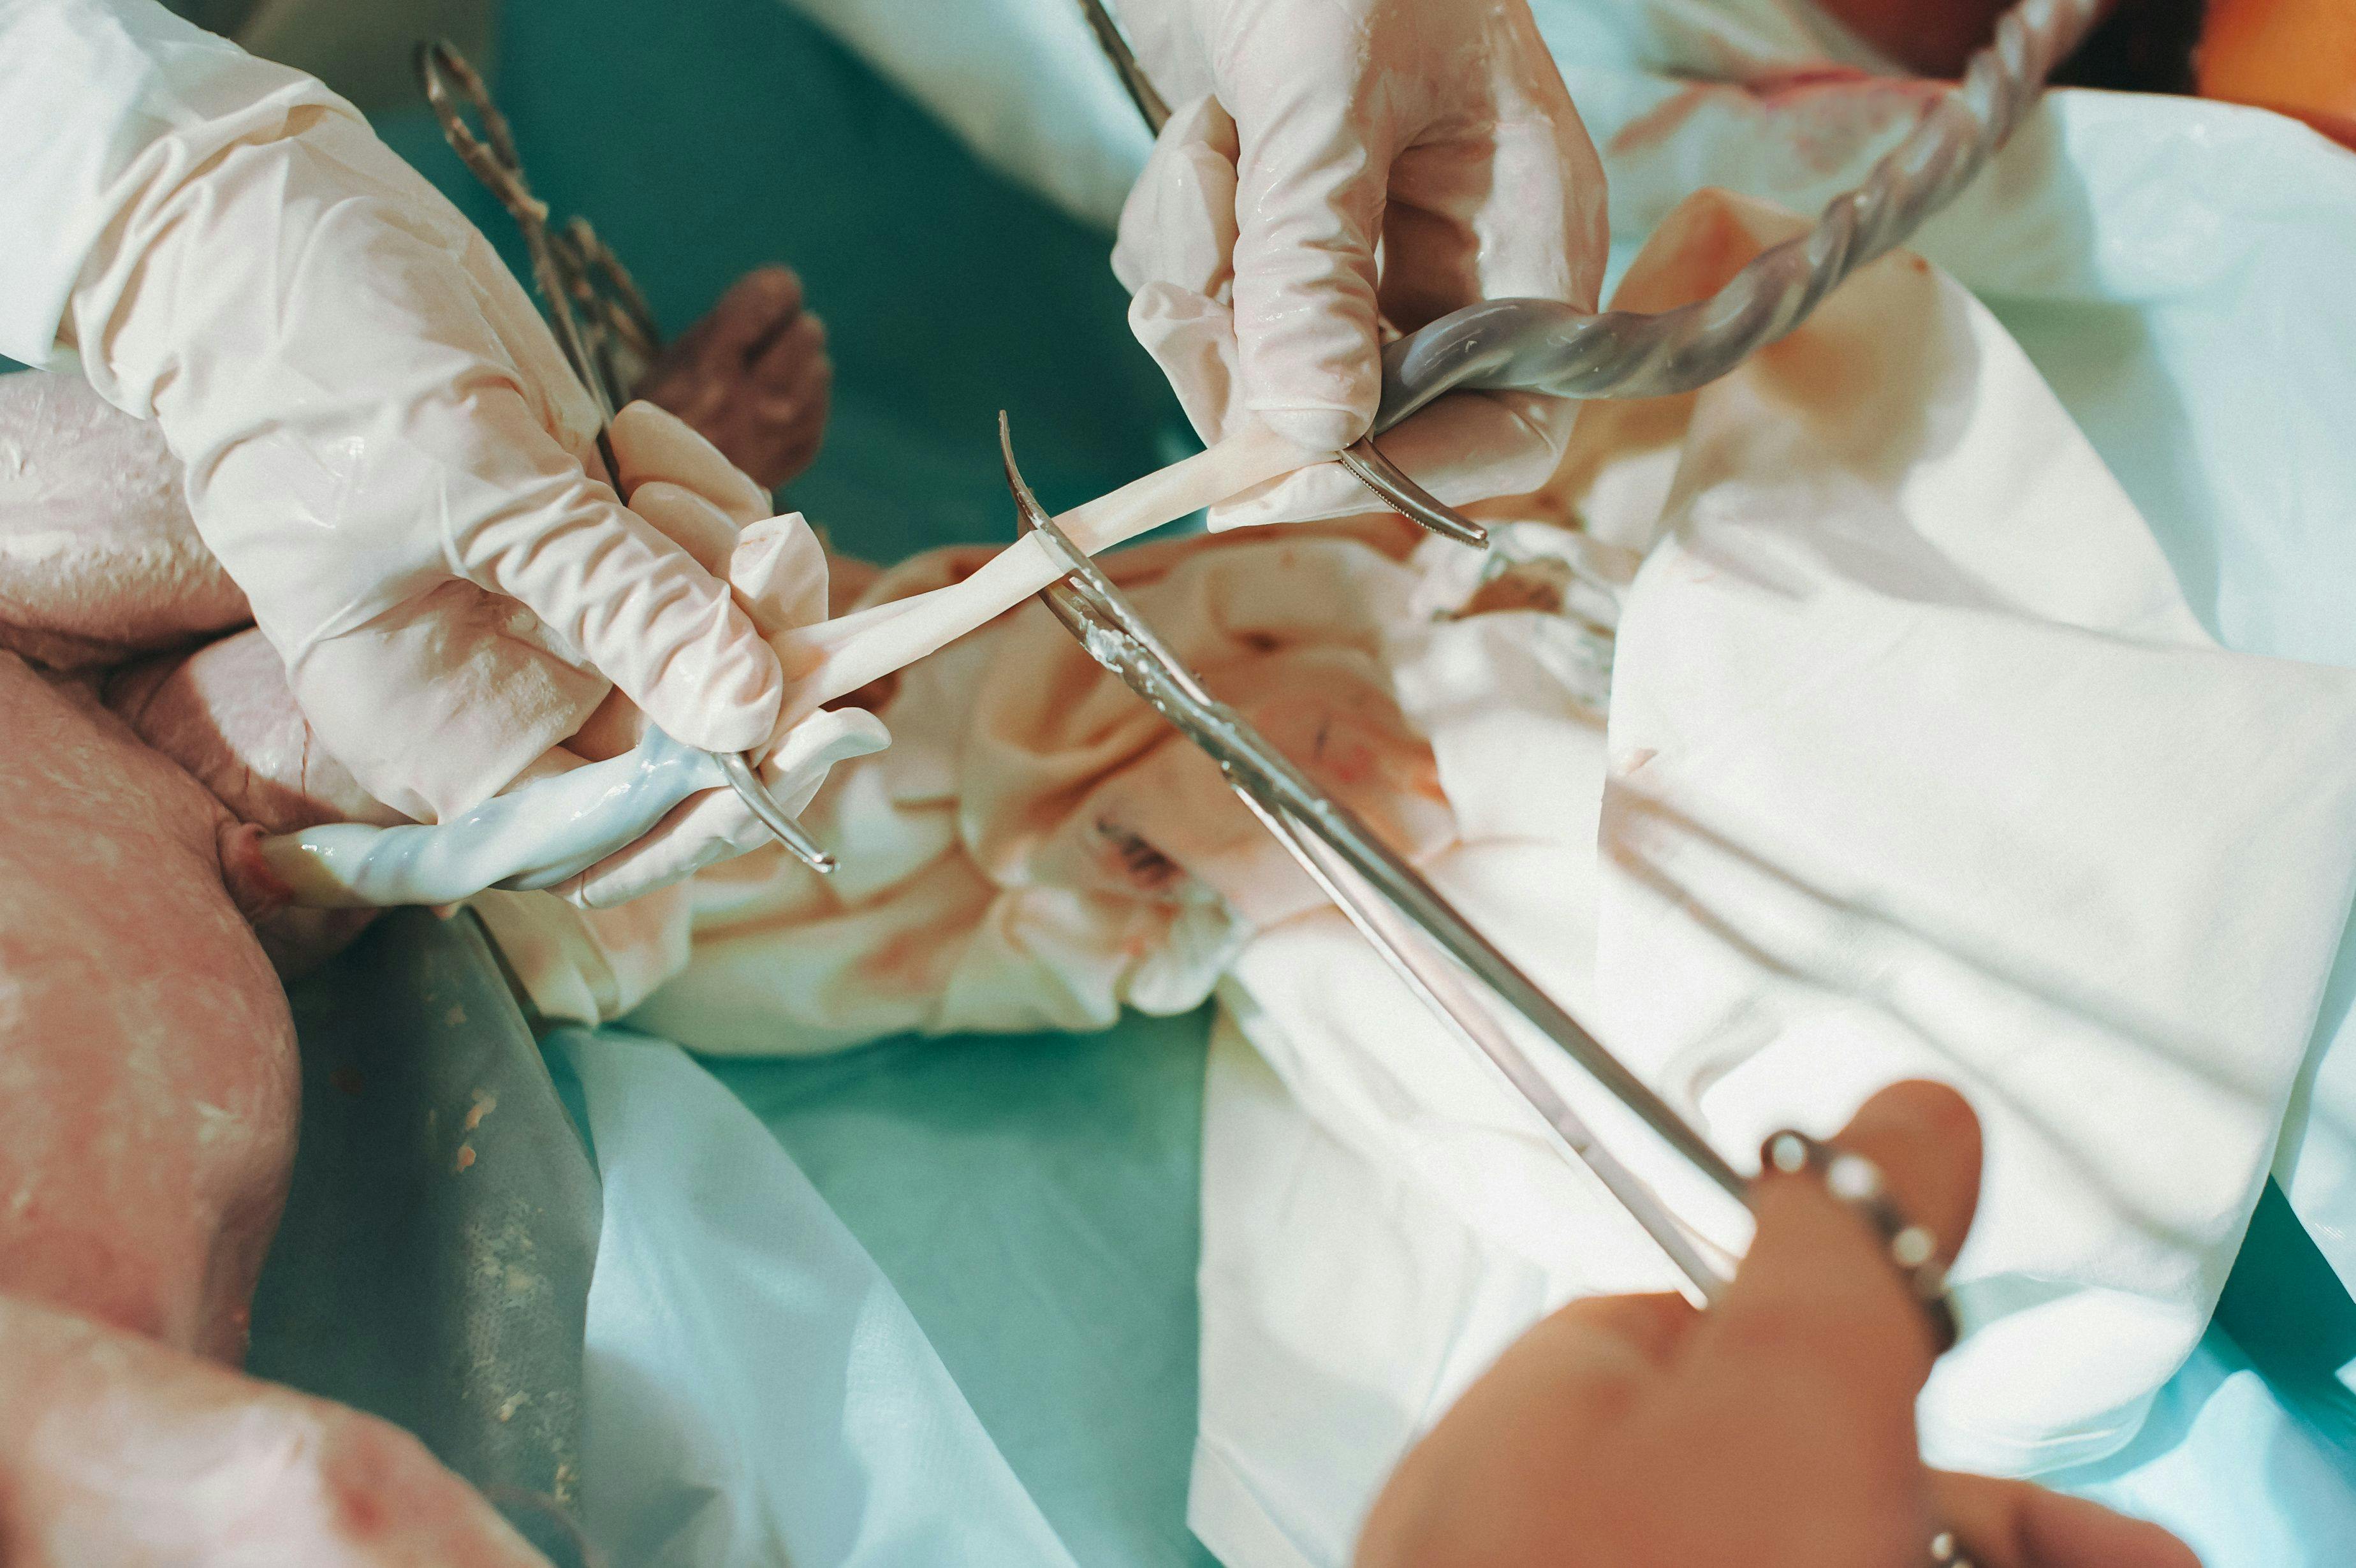 Placental cord drainage may be simpler, more effective than standard practice